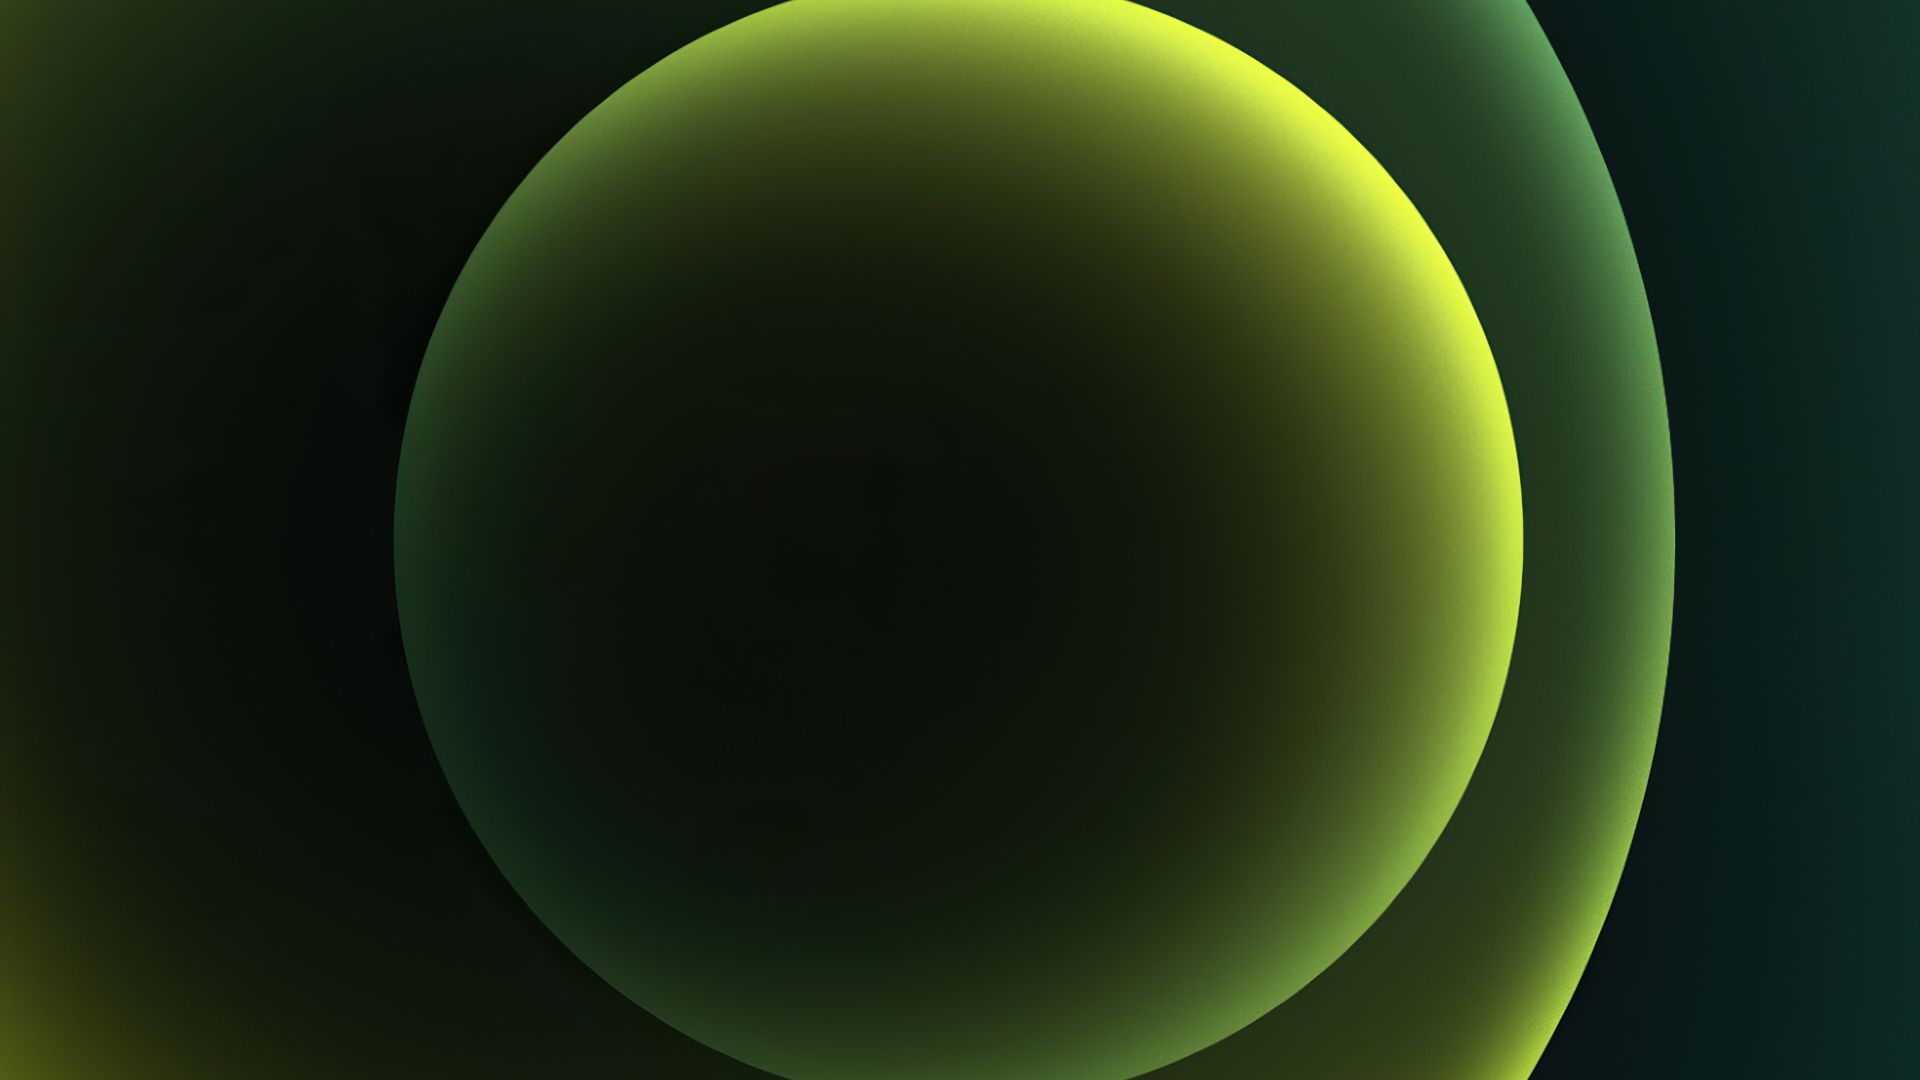 iPhone 12, green, abstract, Apple October 2020 Event, 4K (horizontal)